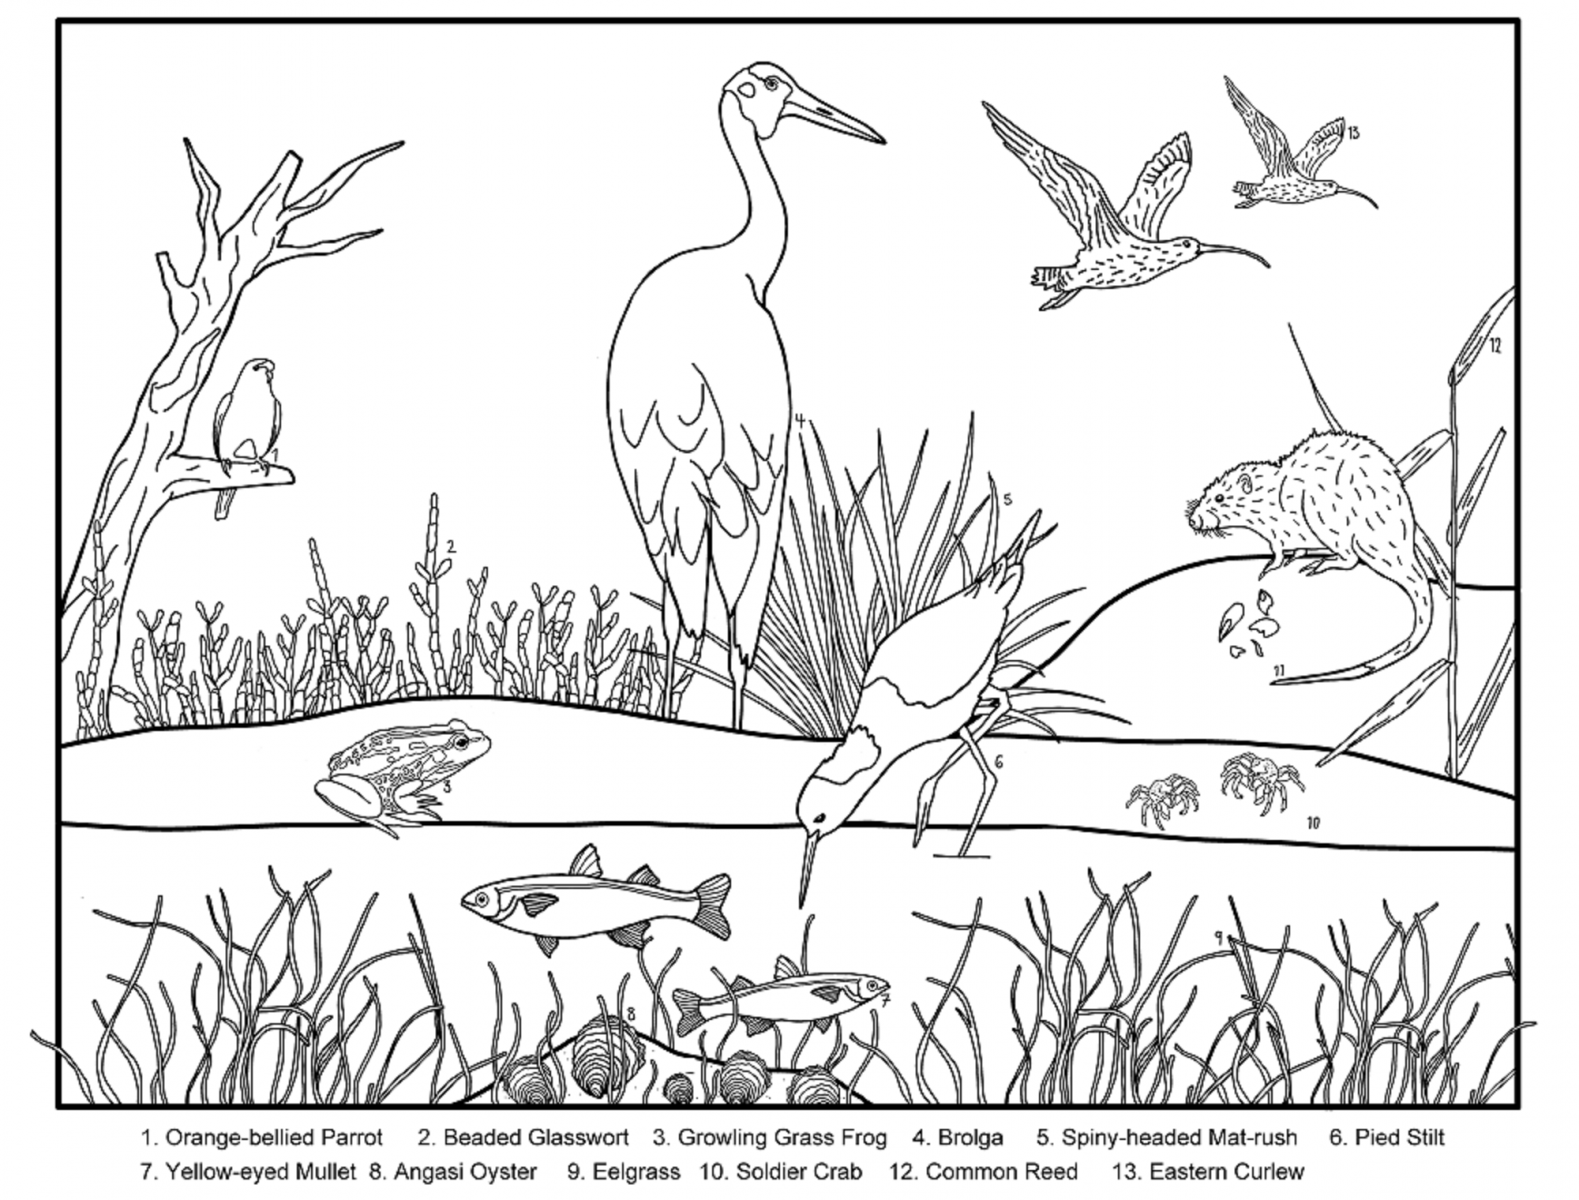 colour-in-a-wetland